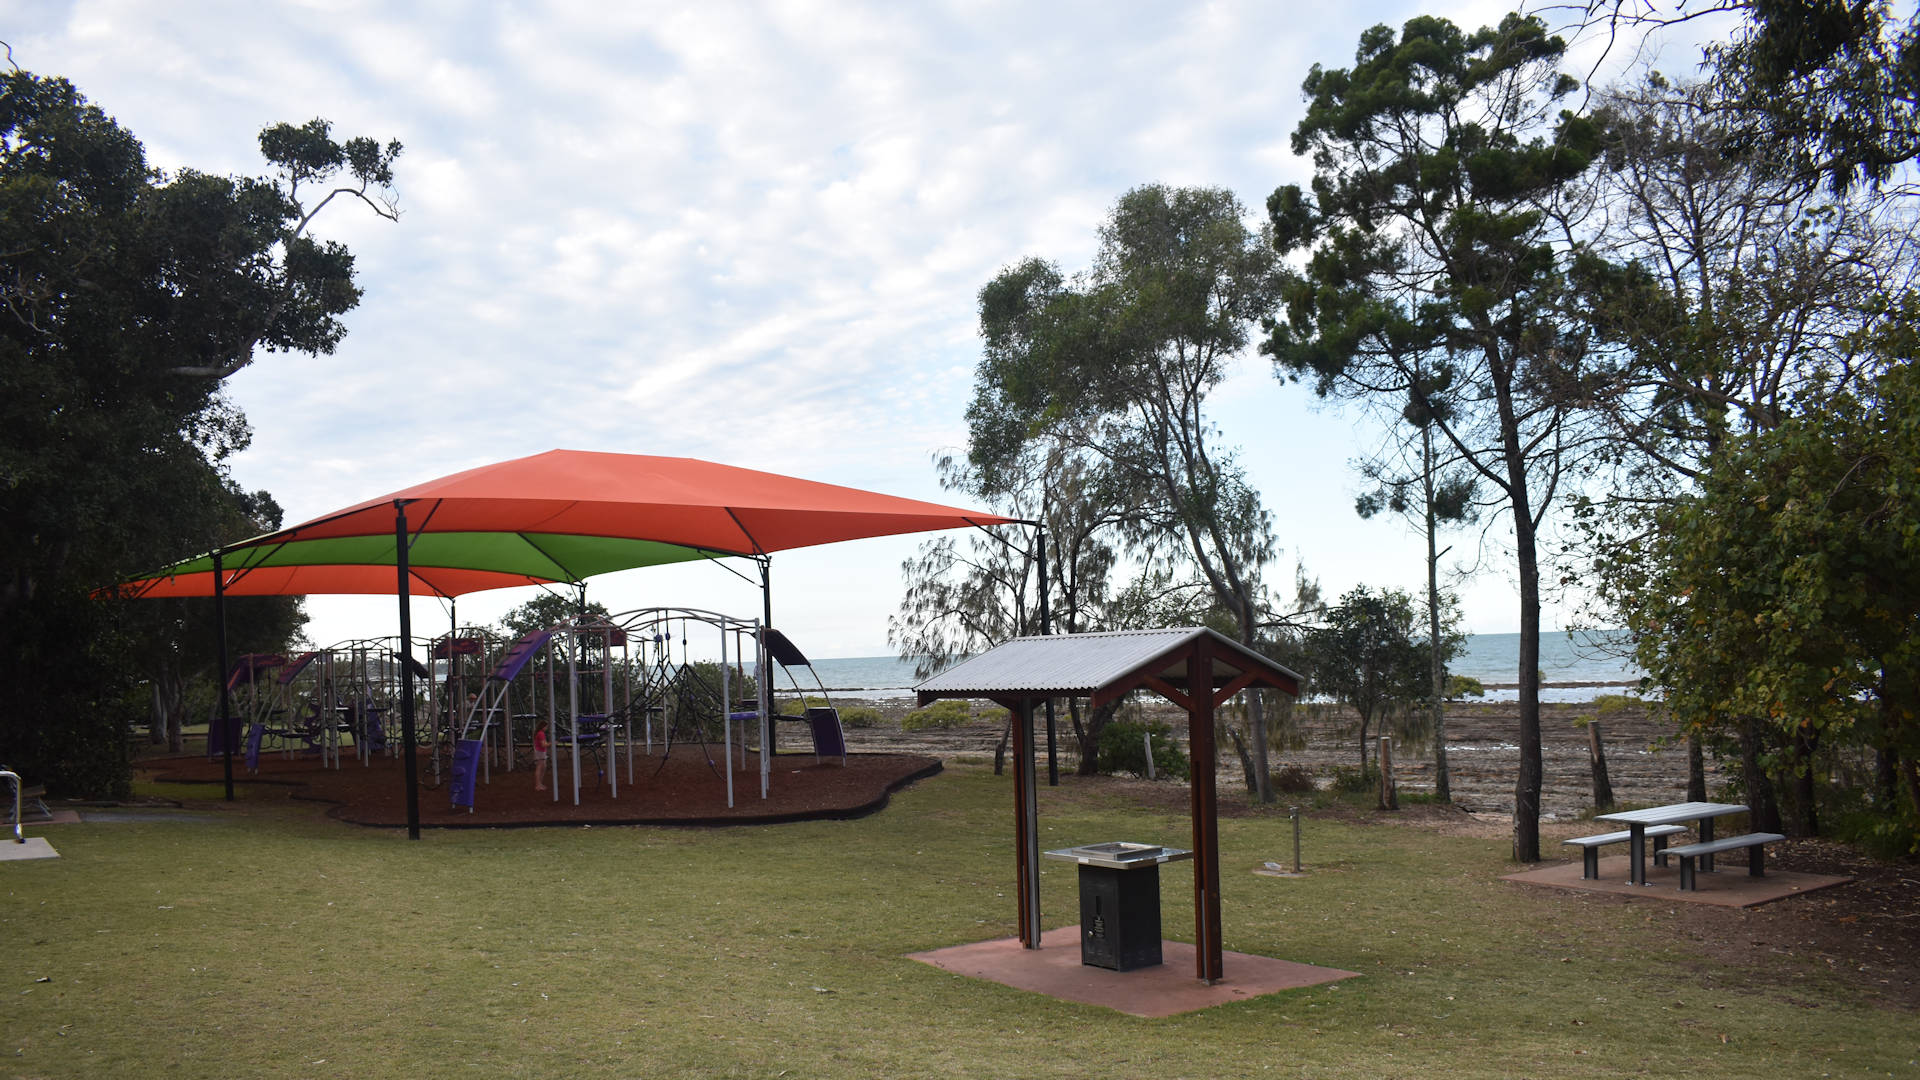 Playground, BBQ, and picnic table in a park, taken at The Pines in Hervey Bay